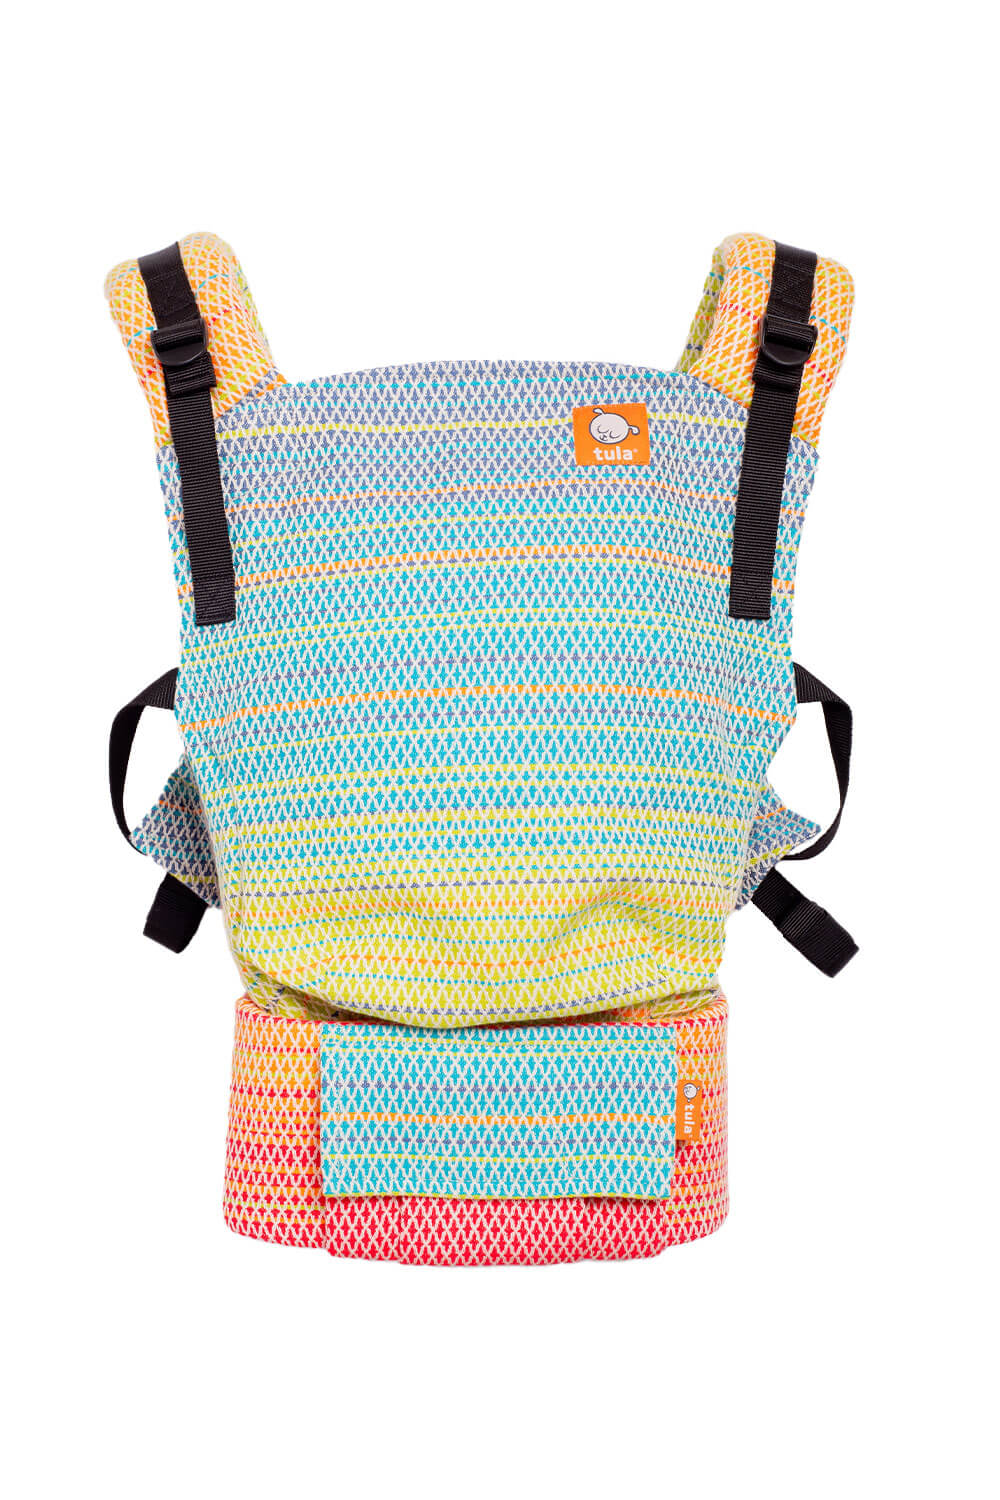 Pastel Rainbow - Signature Woven Free-to-Grow Baby Carrier